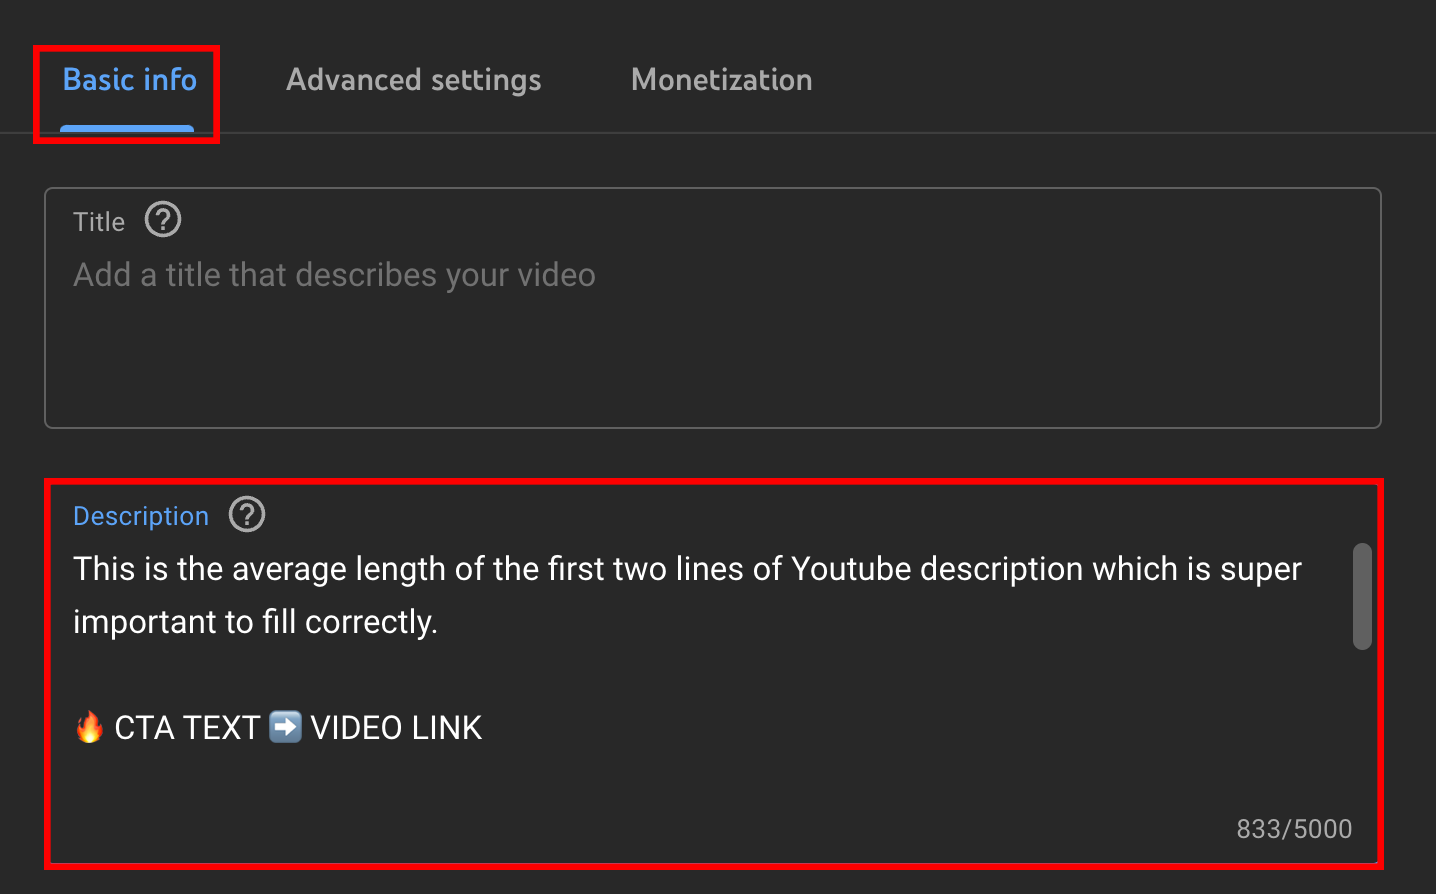 The uploads default screen, with the Basic info tab highlighted in the top left corner.